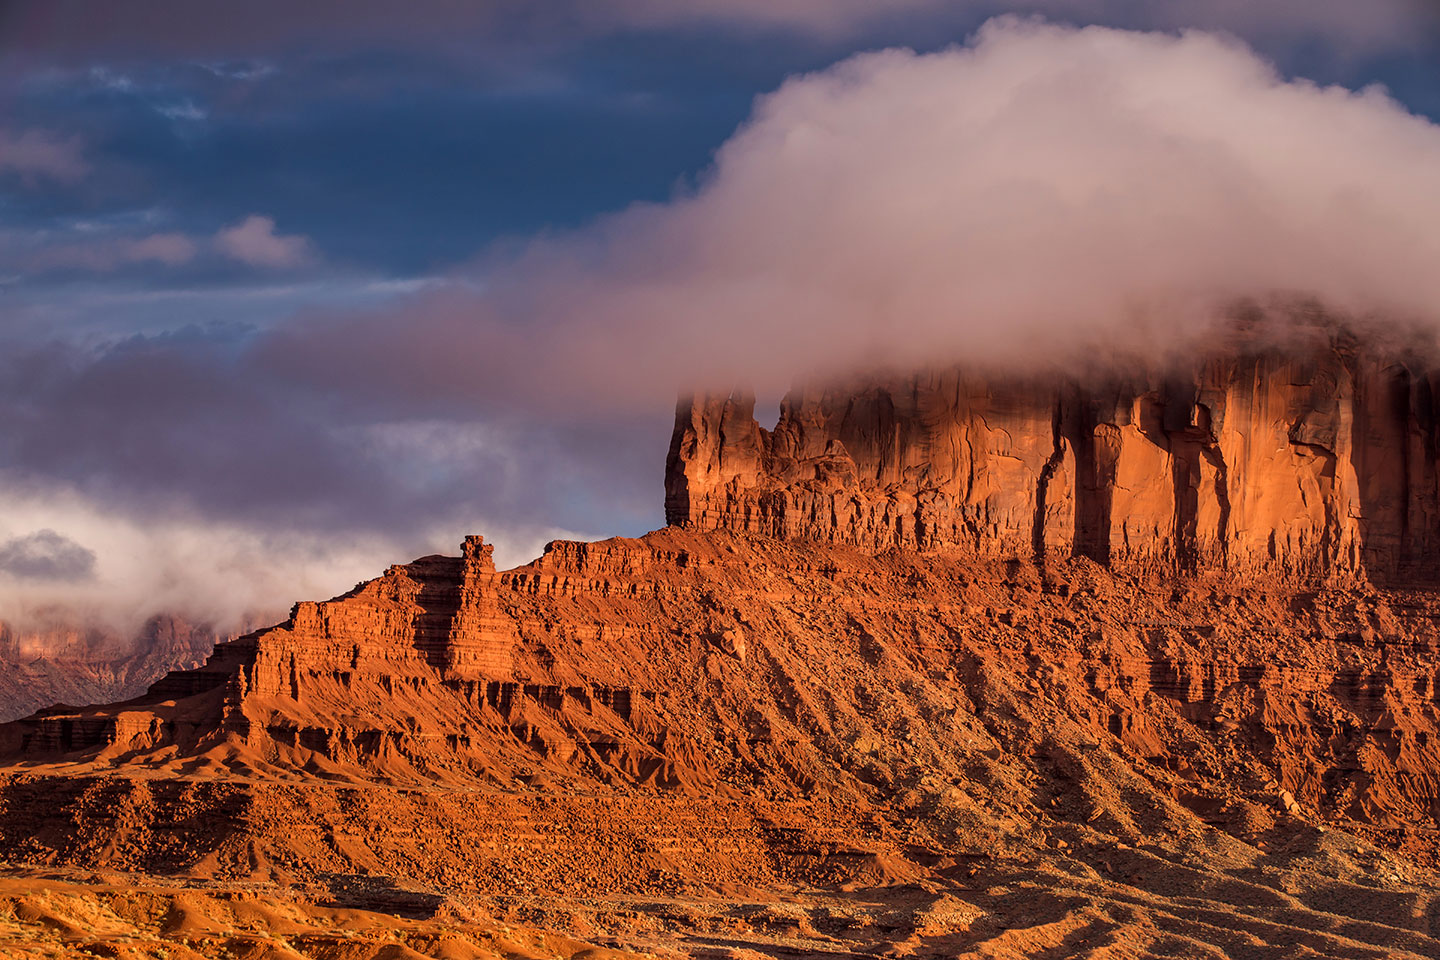 Cloud formation over a butte in Monument Valley National Park